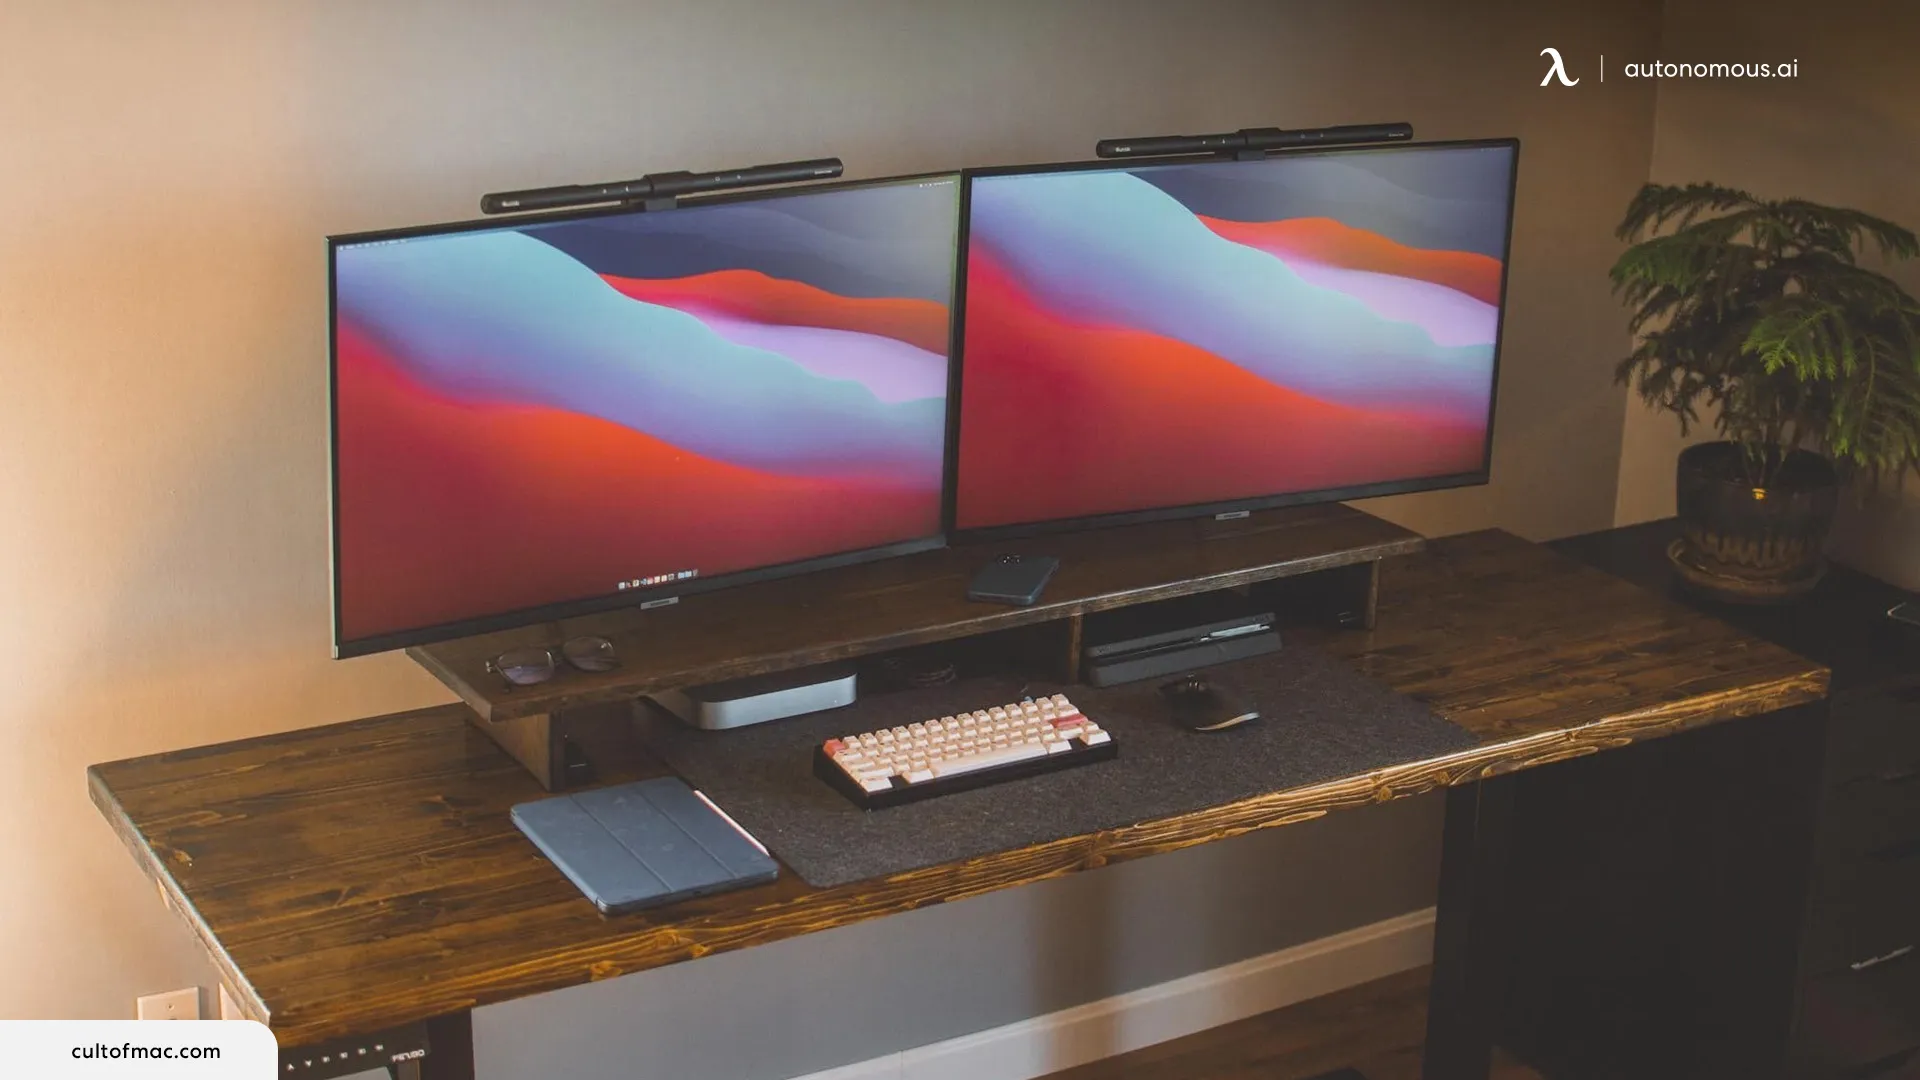 a dual monitor setup can help keep work organized and improve efficiency